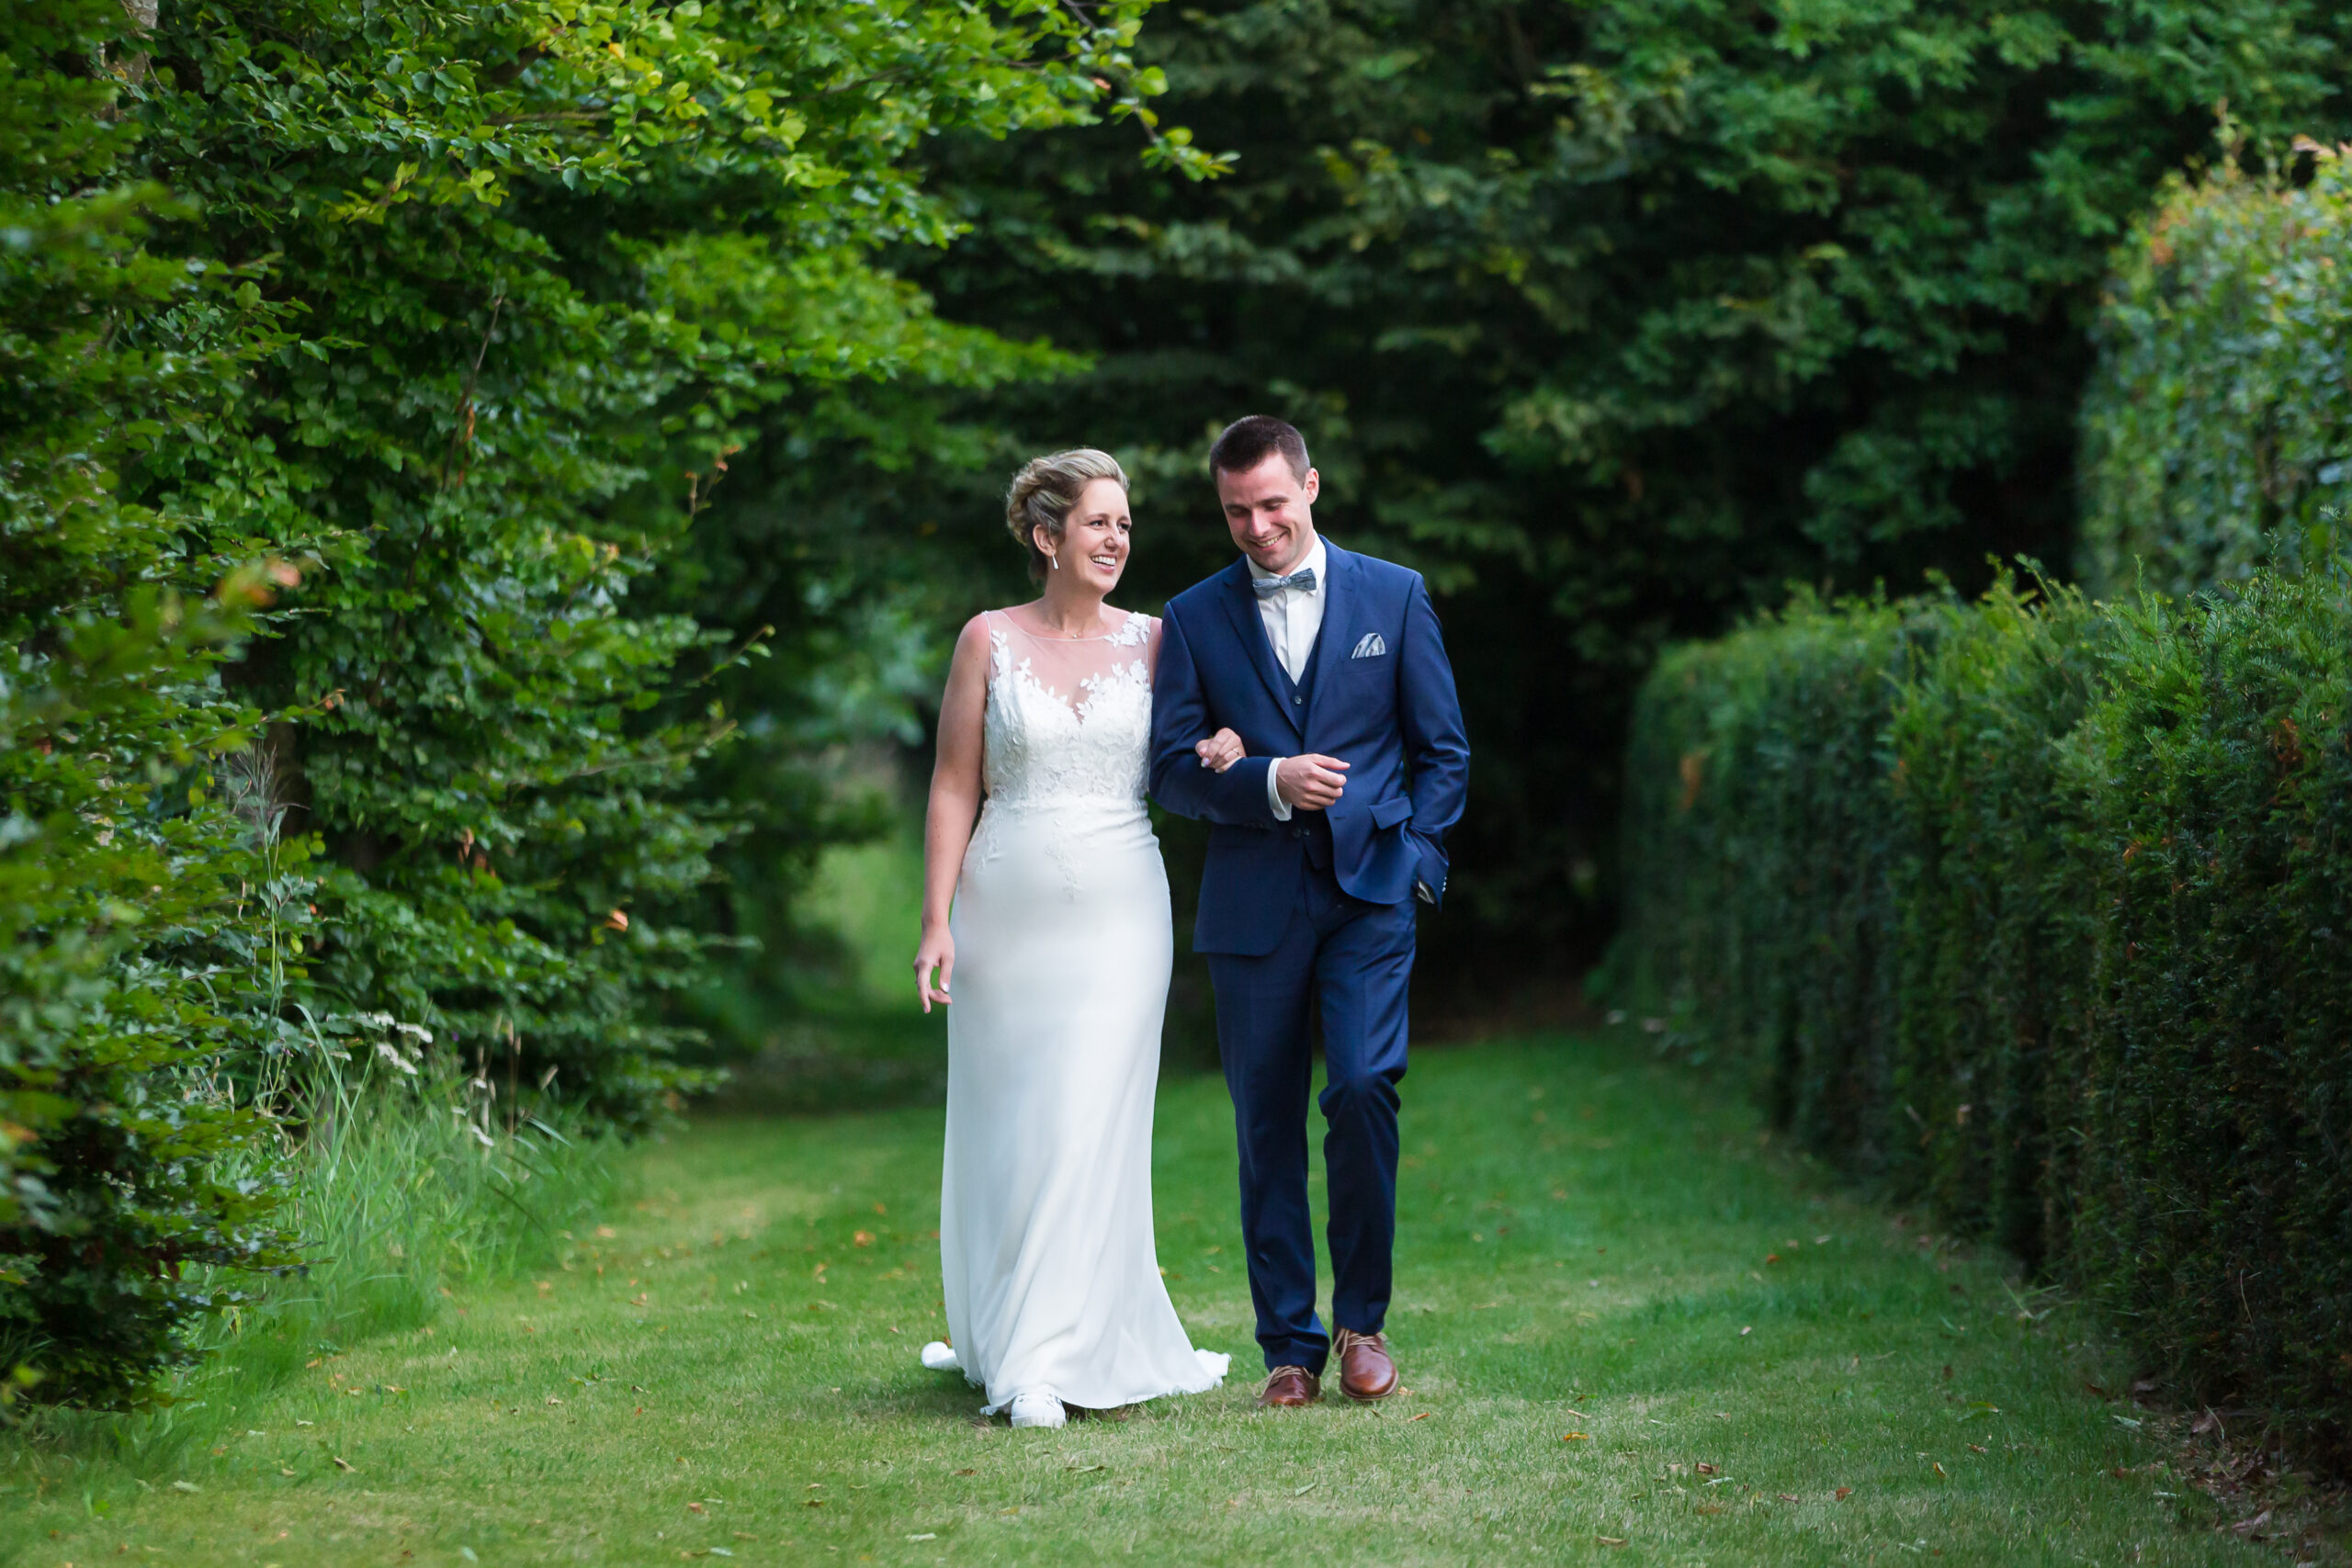 outdoor Dallas wedding day with bride and groom locking arms and walking through a lush green garden talking and smiling with one another captured by Dallas wedding photographers